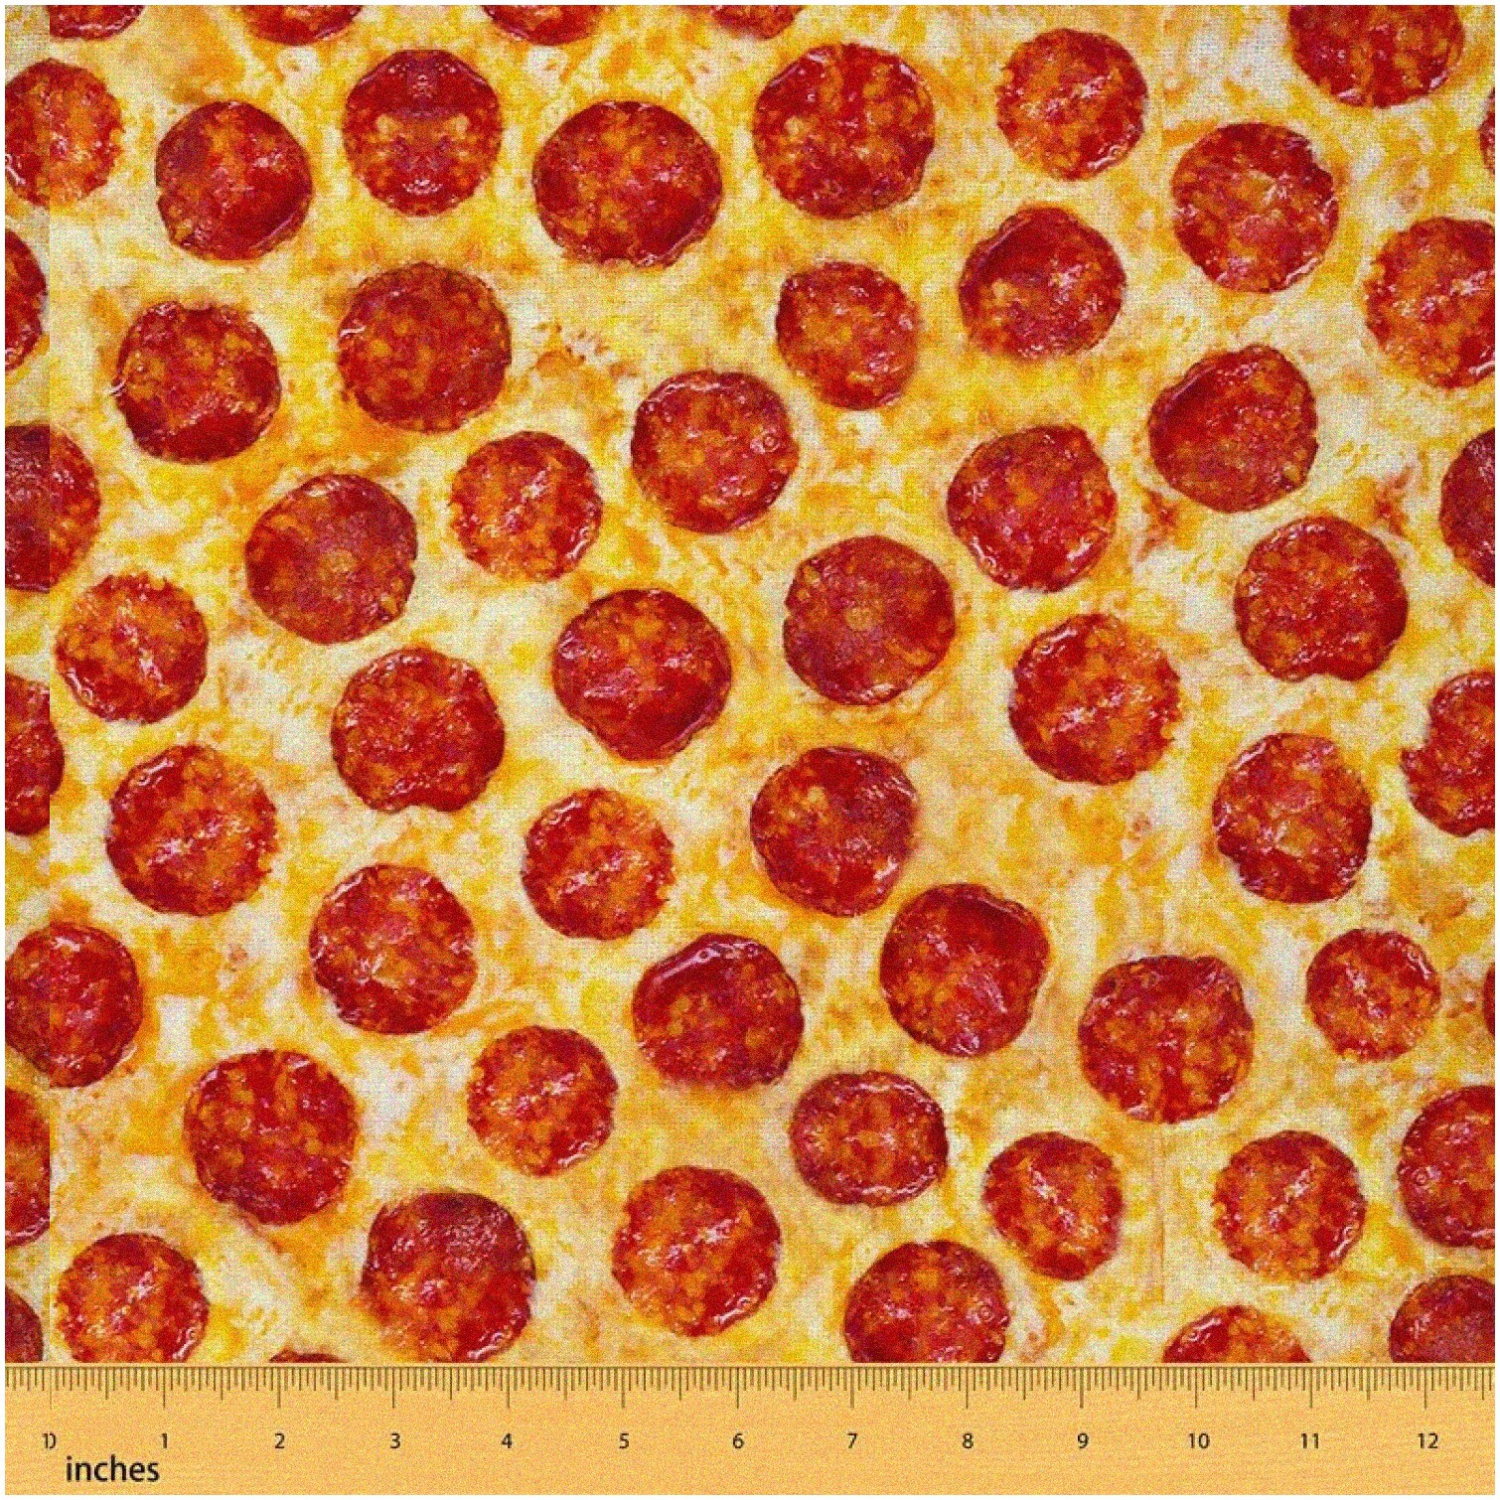 Pepperoni Paradise: Spicy Slice Upholstery Fabric - DIY Delight for Home Decor! Waterproof, Orange Red, 1 Yard